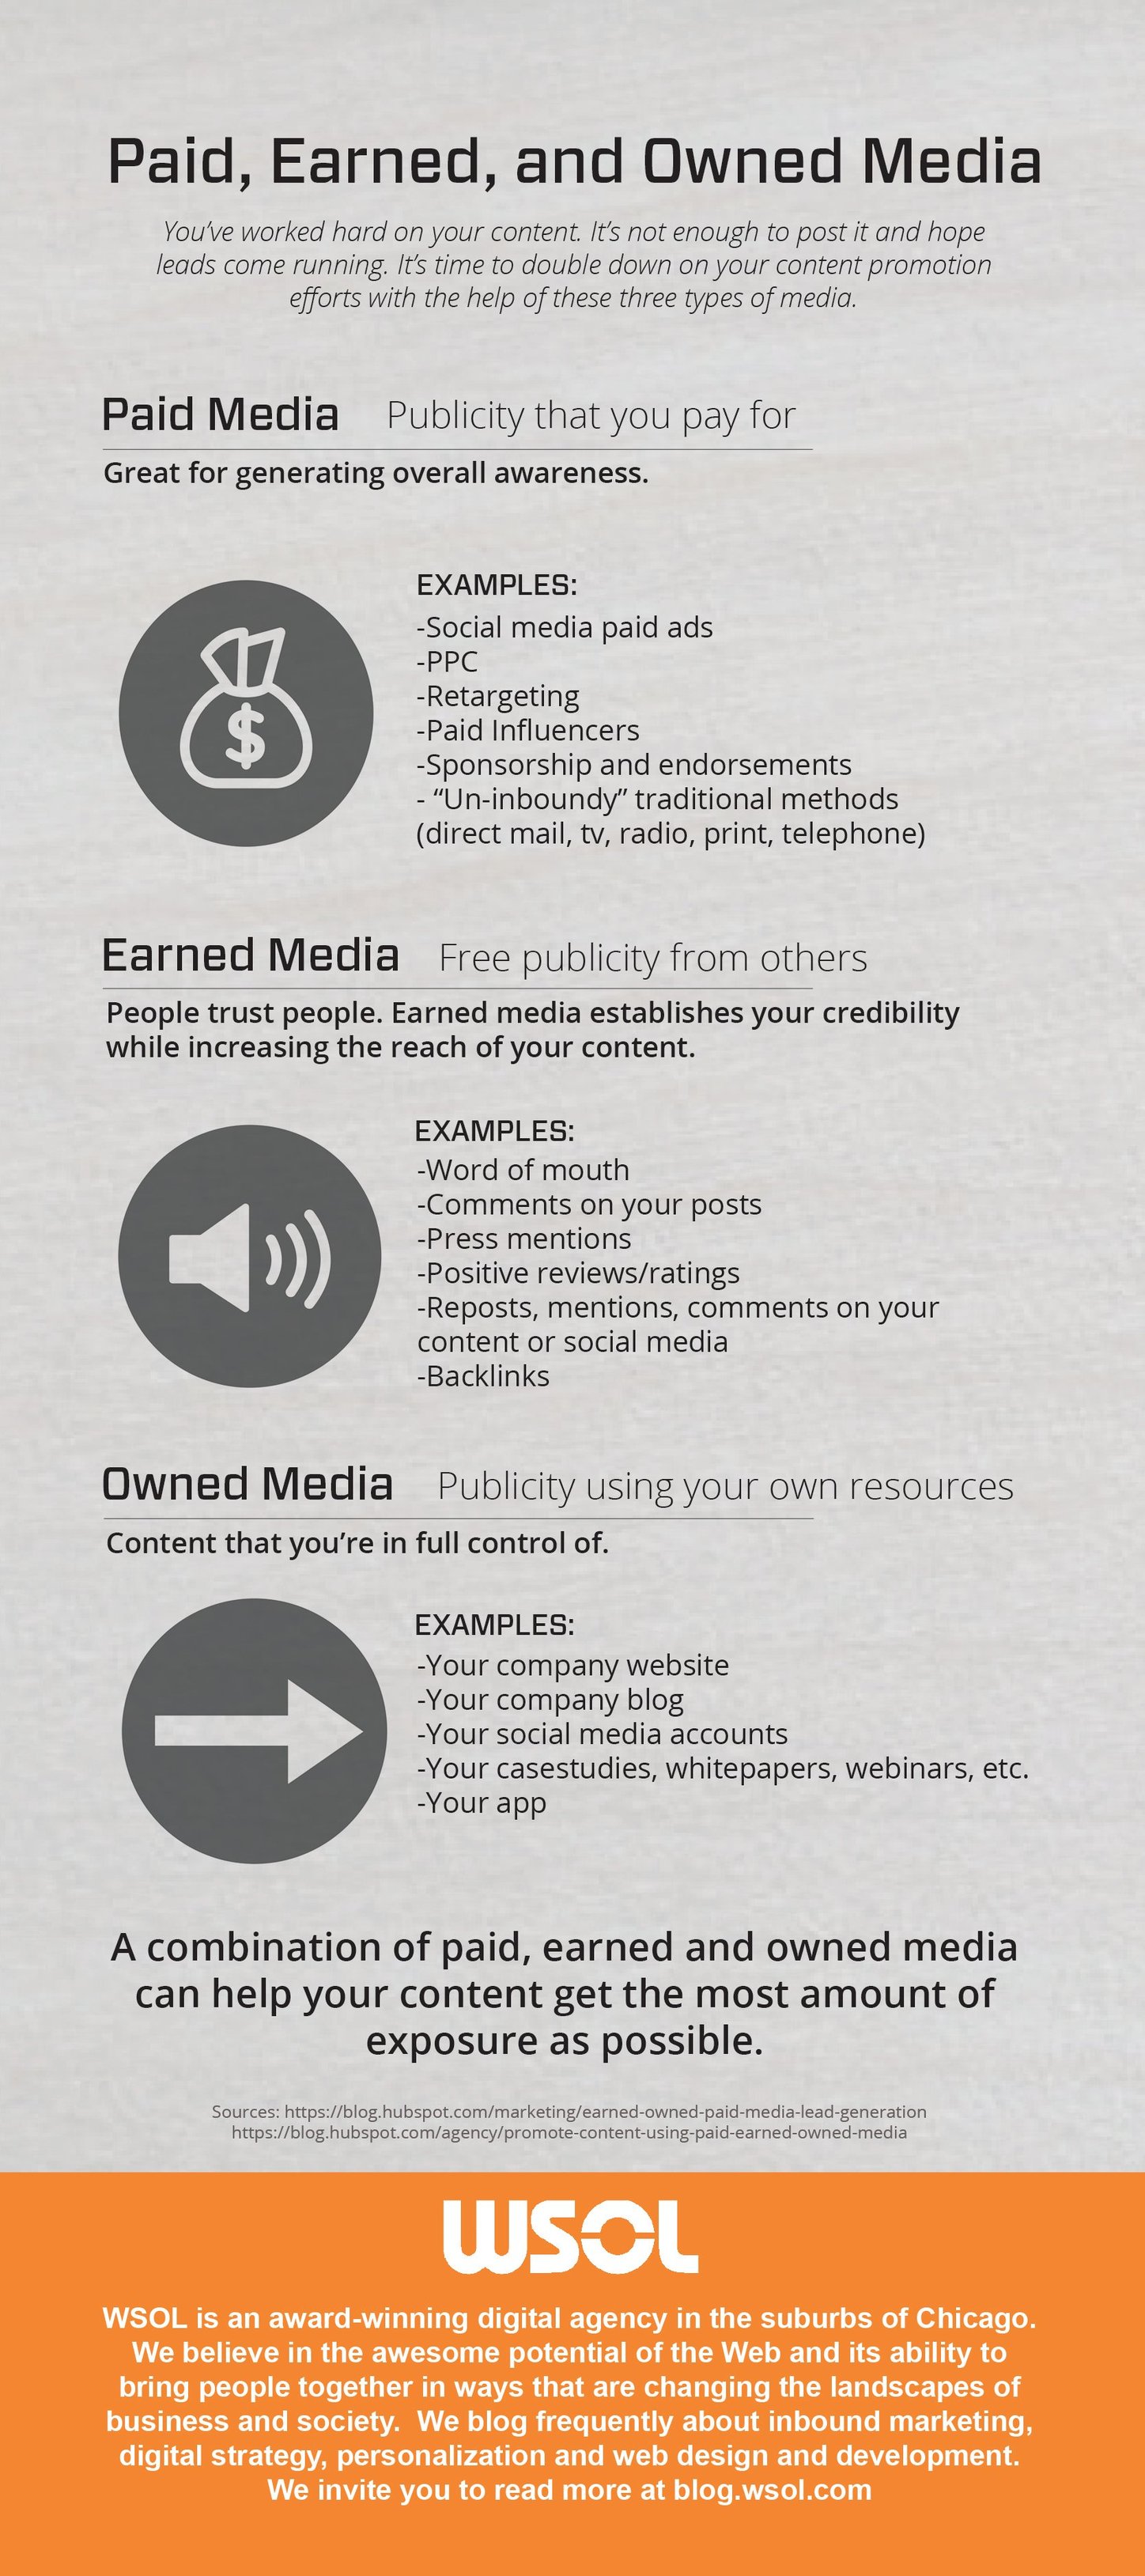 Paid, Earned, and Owned Media